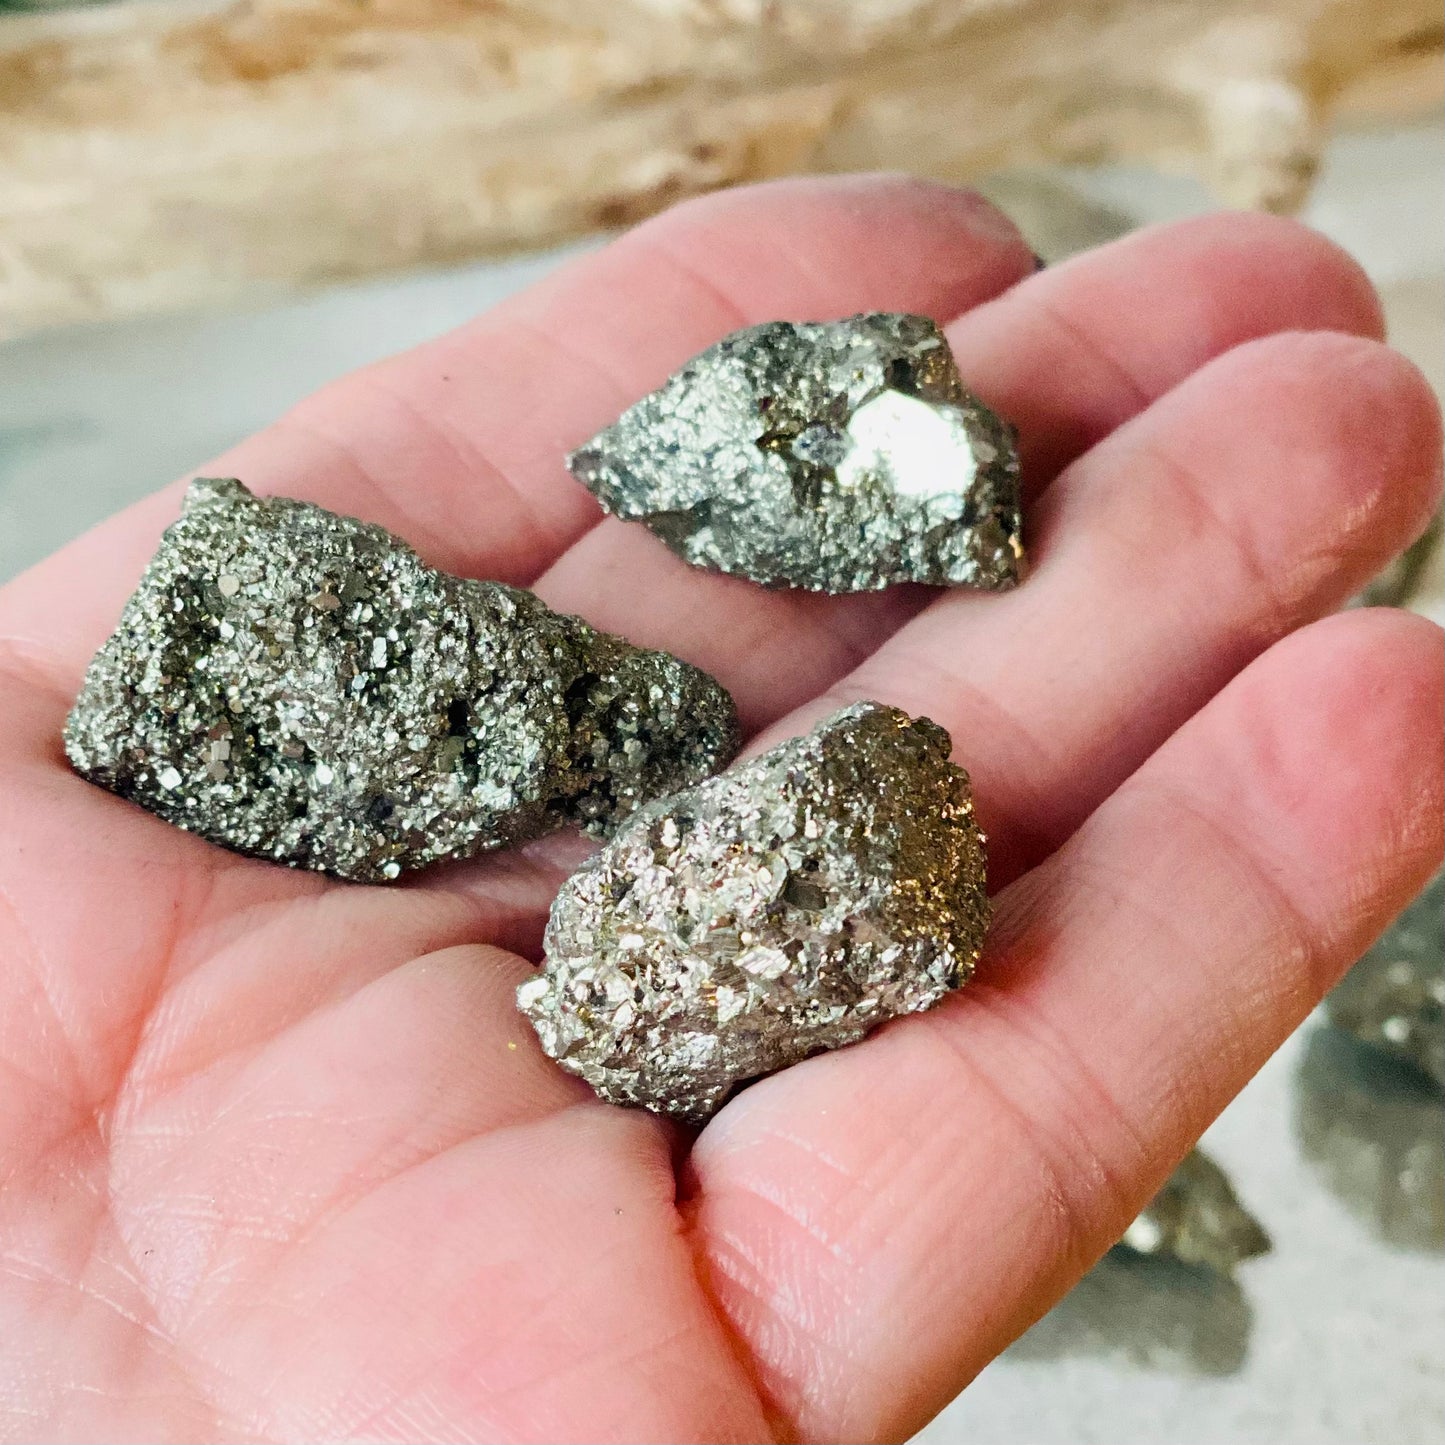 Pyrite Raw Tumbled Stones for Prosperity and Good Fortune!